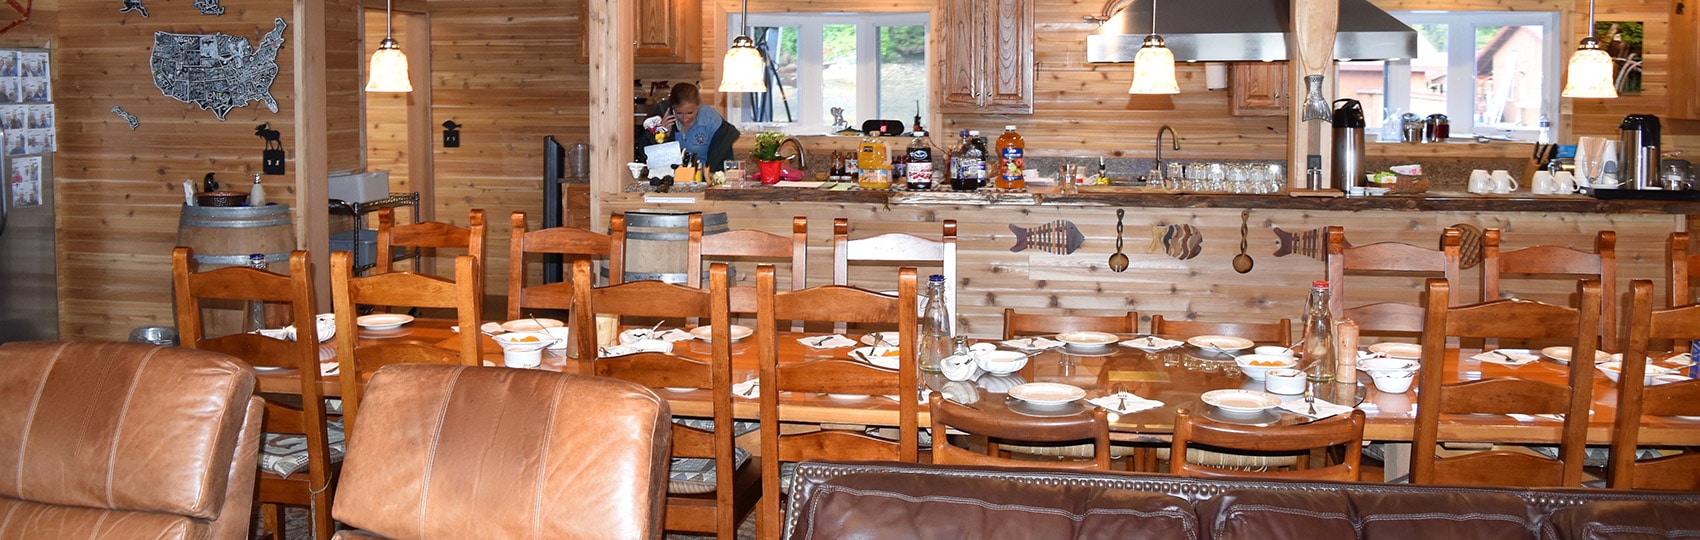 Long dining table and kitchen at the lodge.